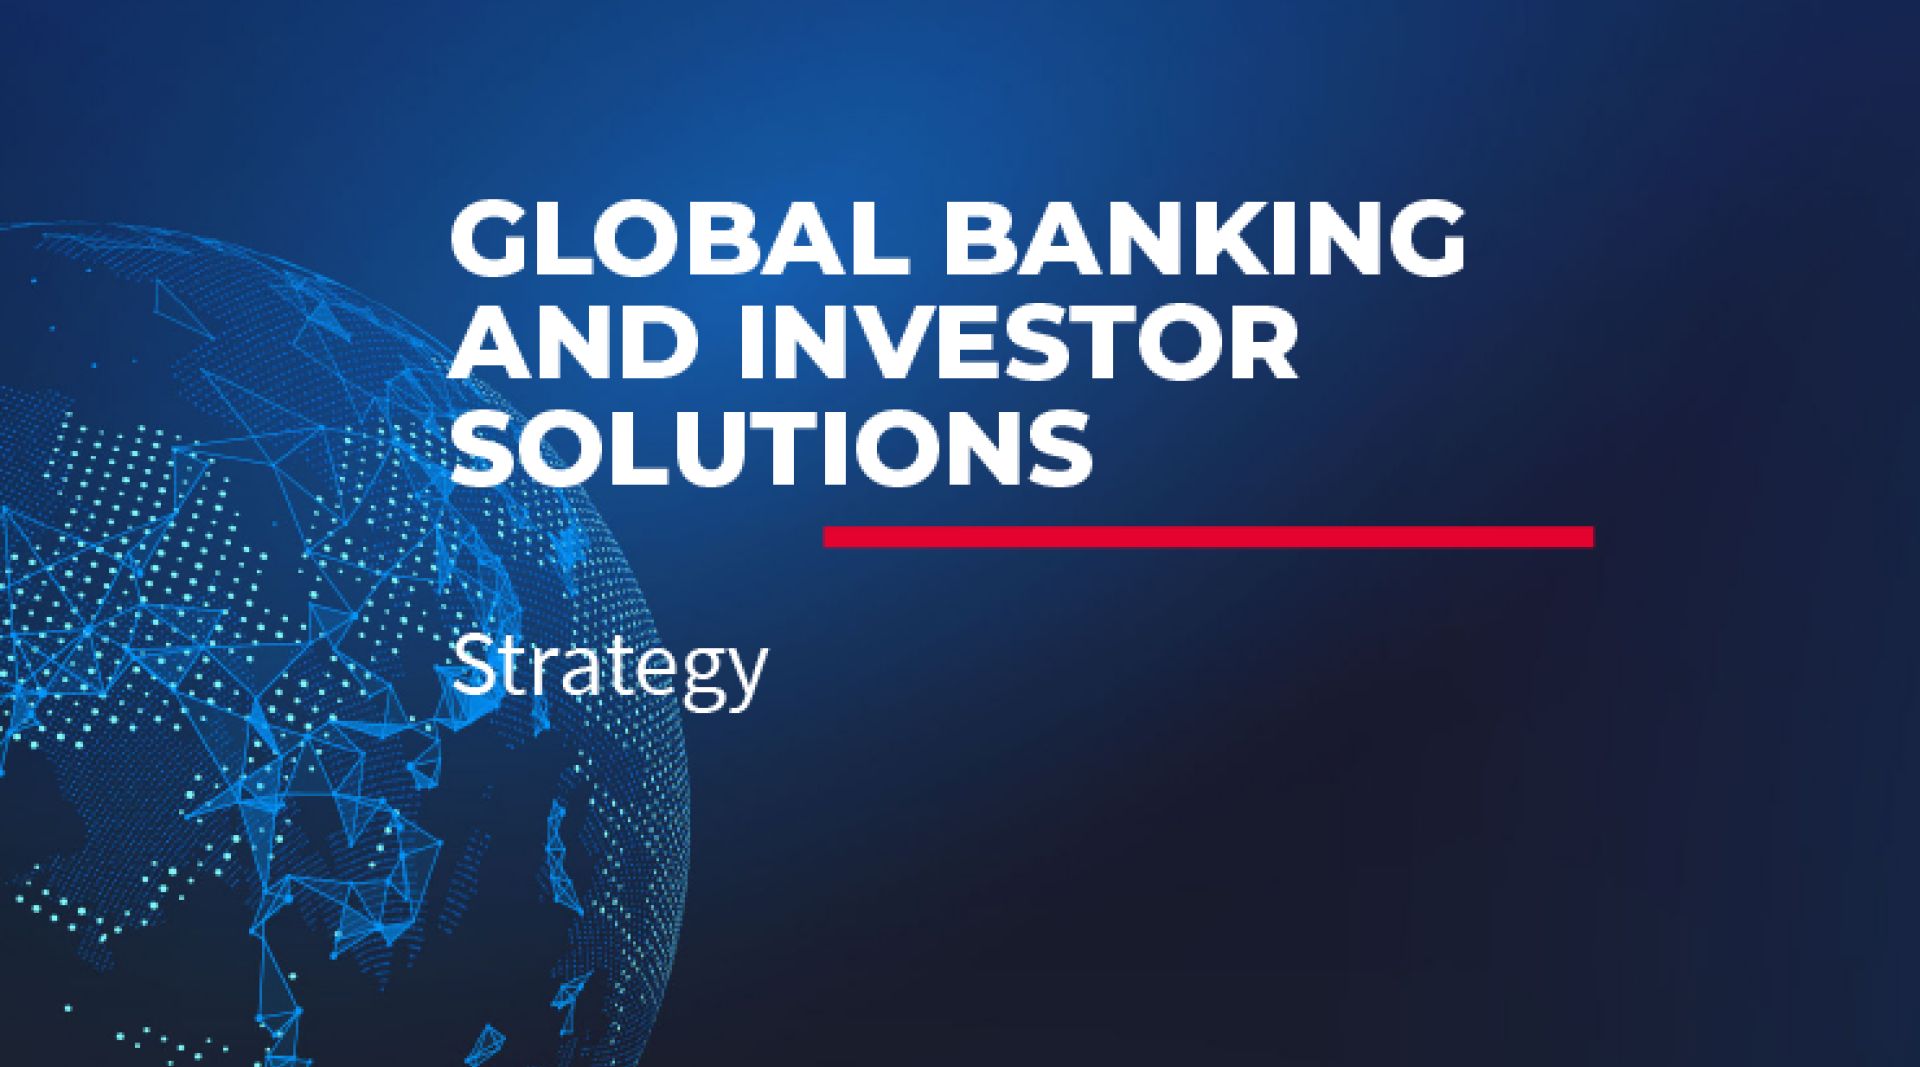 Global Banking and Investor Solutions - Strategy